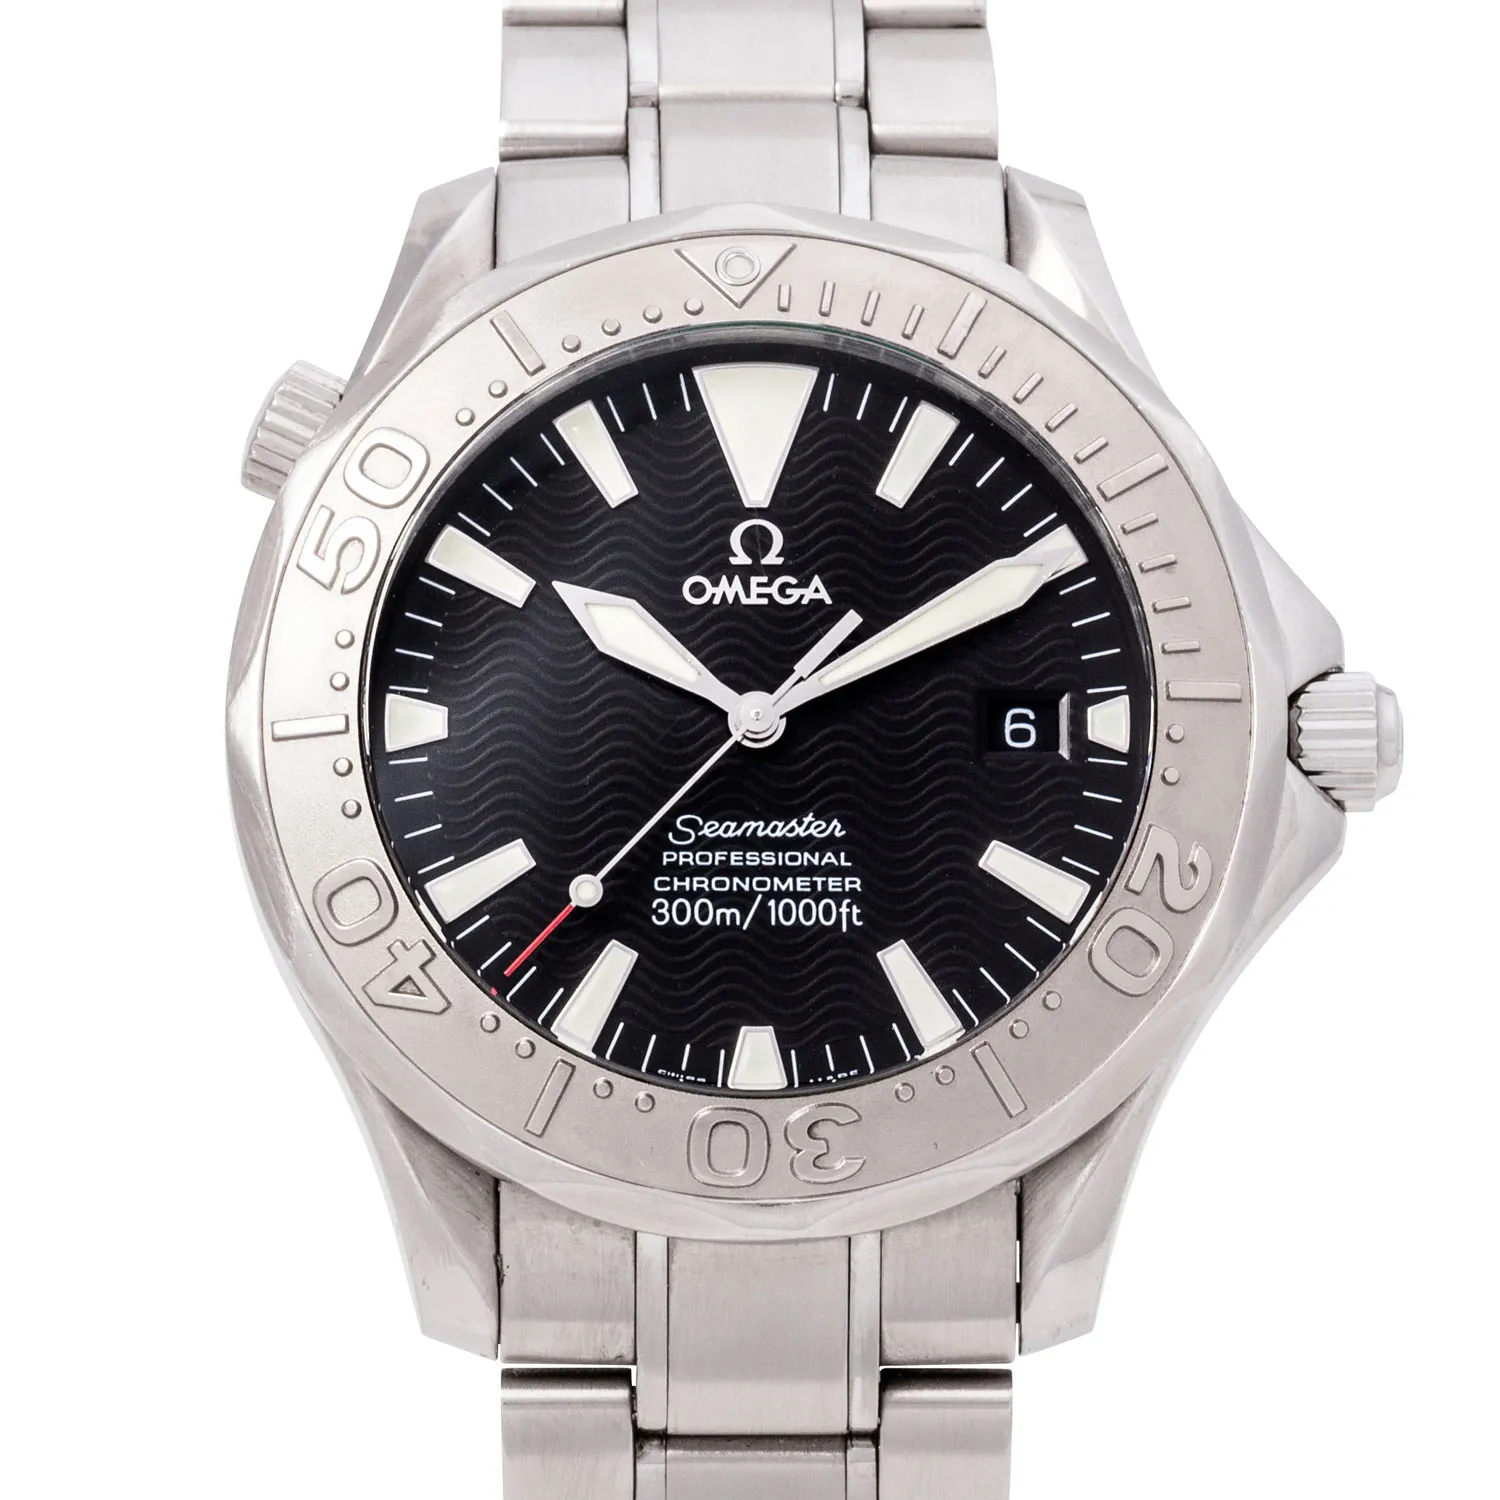 Omega Seamaster Diver 300M 25318000 41mm White gold and stainless steel Black